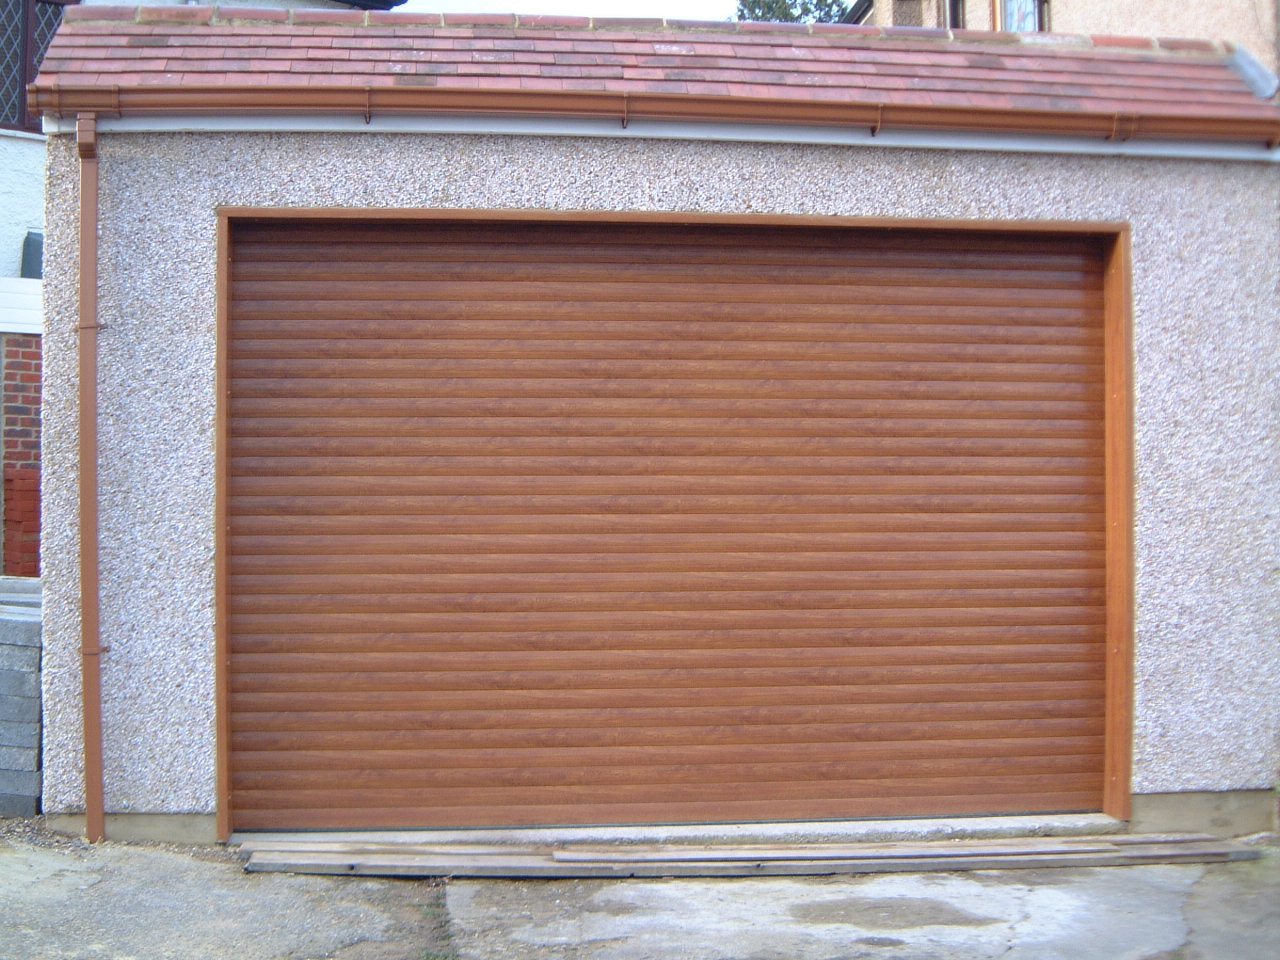 Simple And Minimalist Garage Wooden Door With ALuminium Garage Style With Frane Color Best Wall Traditional Rooftop For Simple Architec Home Design Building Ideas